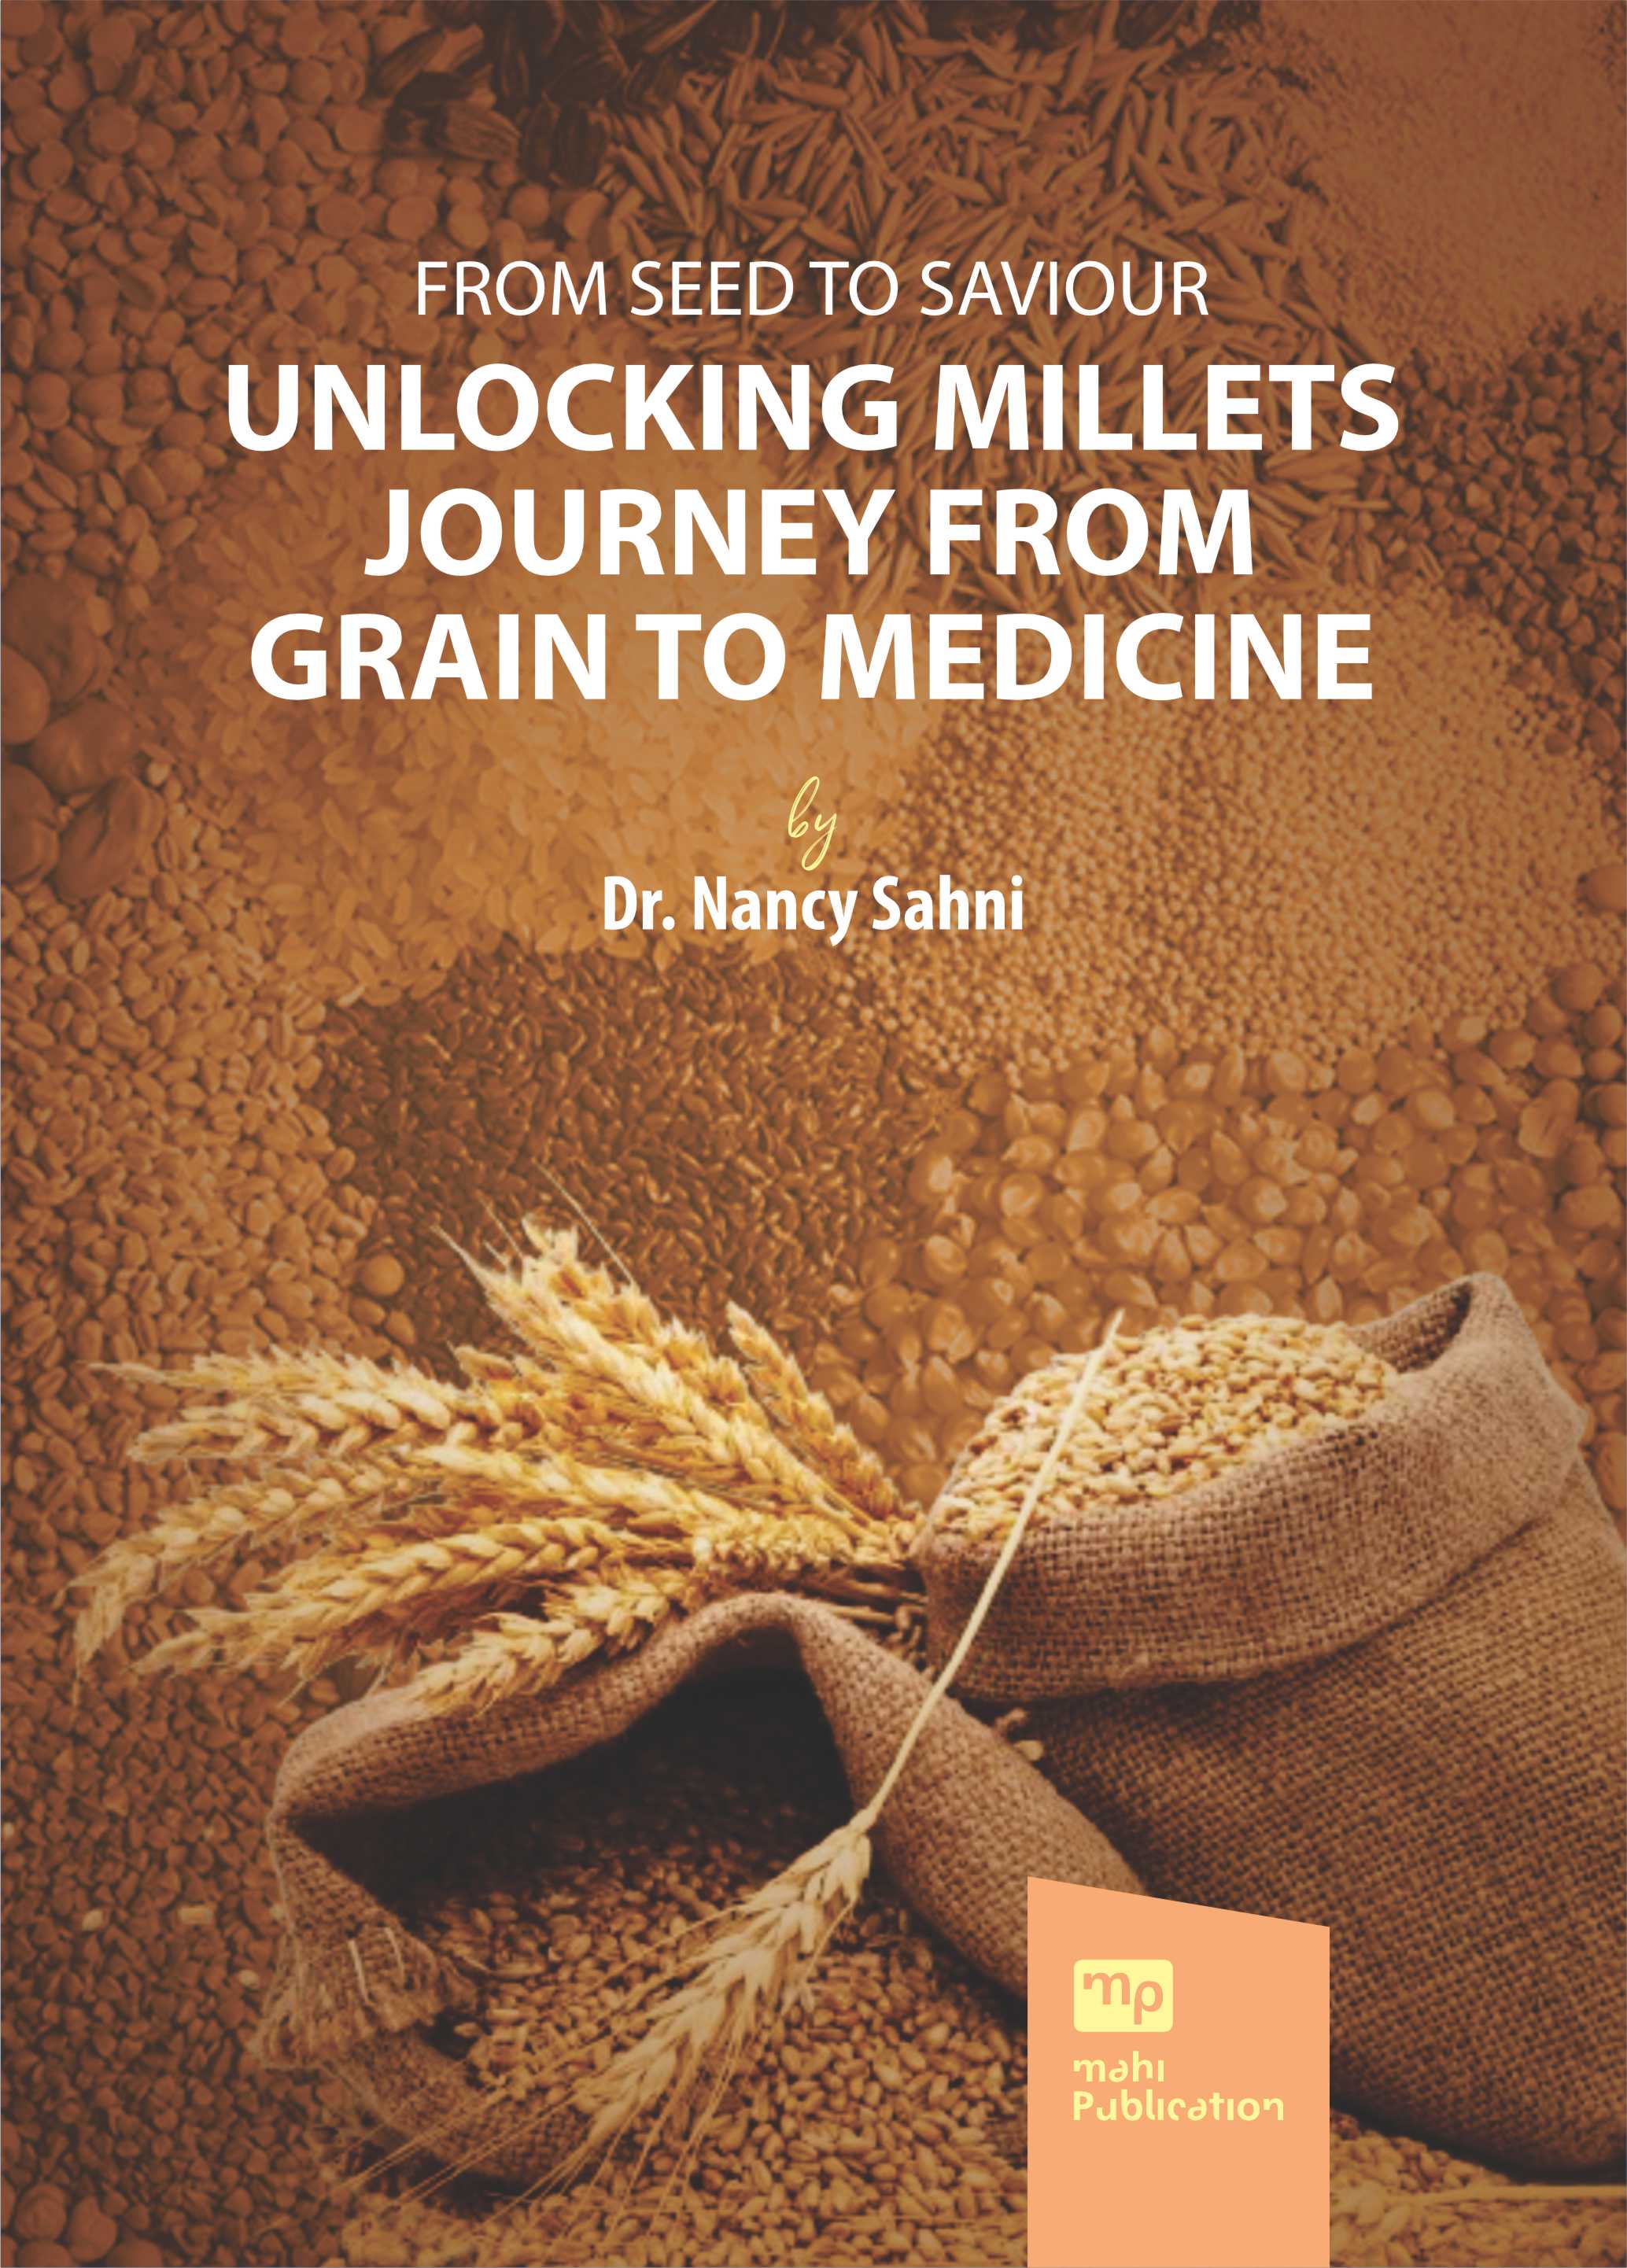 From Seed to Saviour- Unlocking Millets Journey From Grain to Medicine